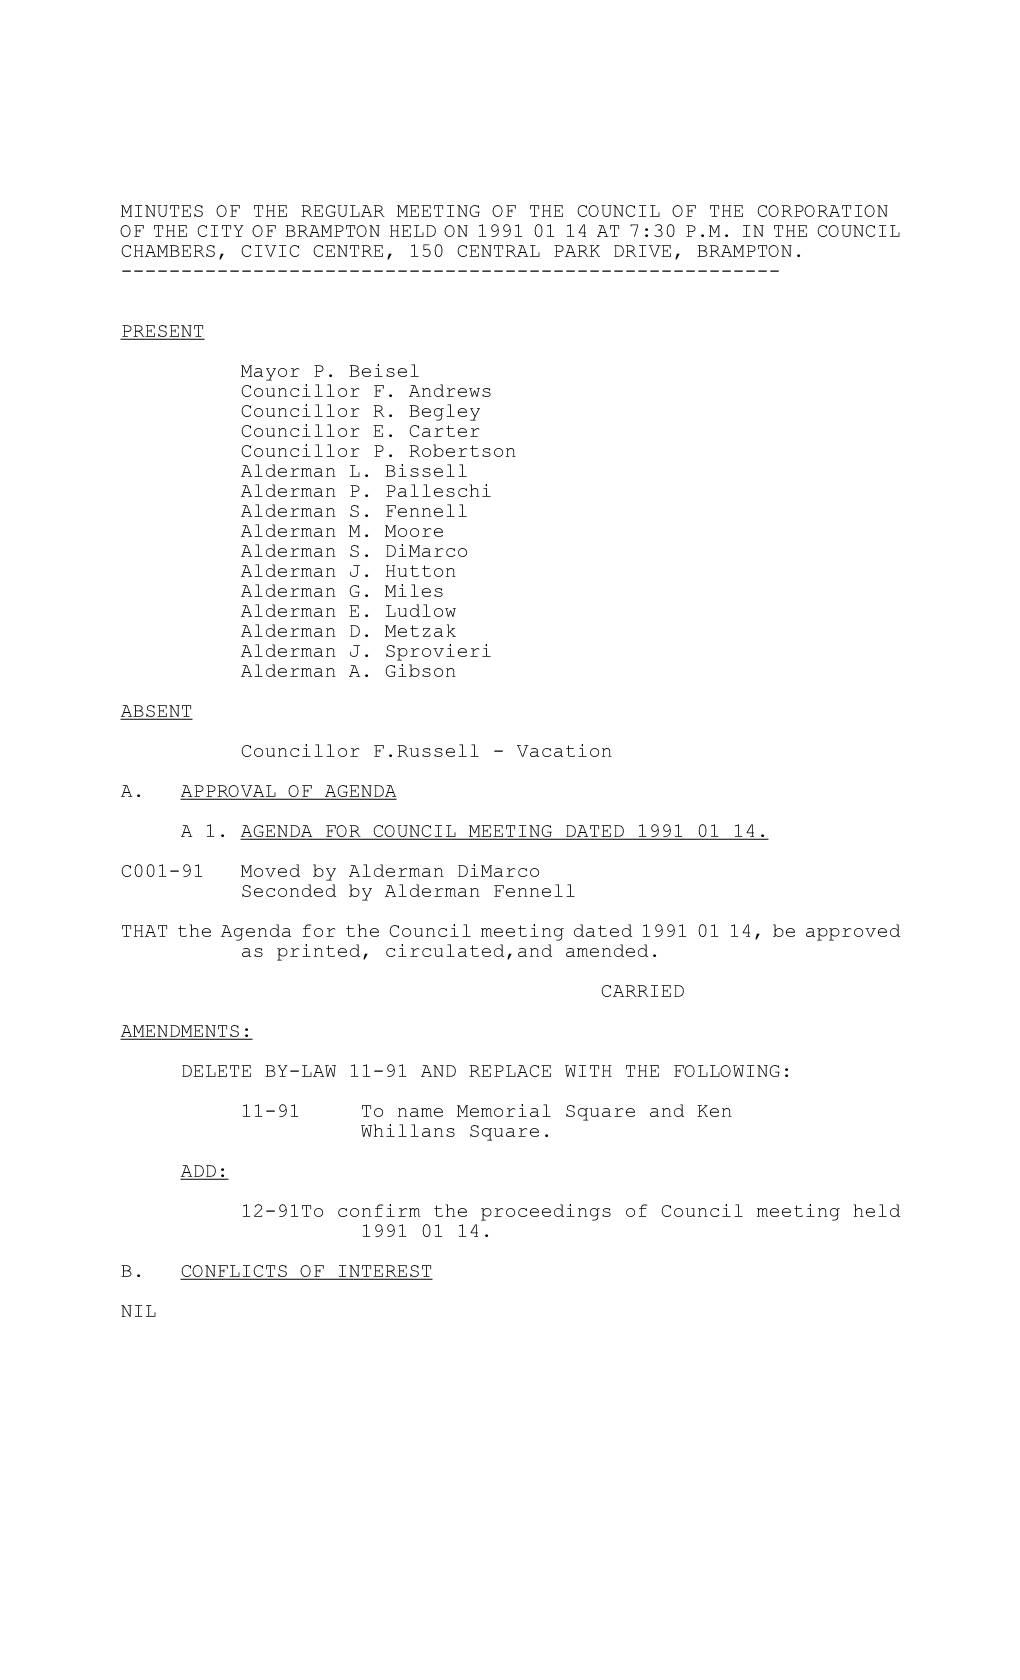 Minutes of the Regular Meeting of the Council of the Corporation of the City of Brampton Held on 1991 01 14 at 7:30 P.M